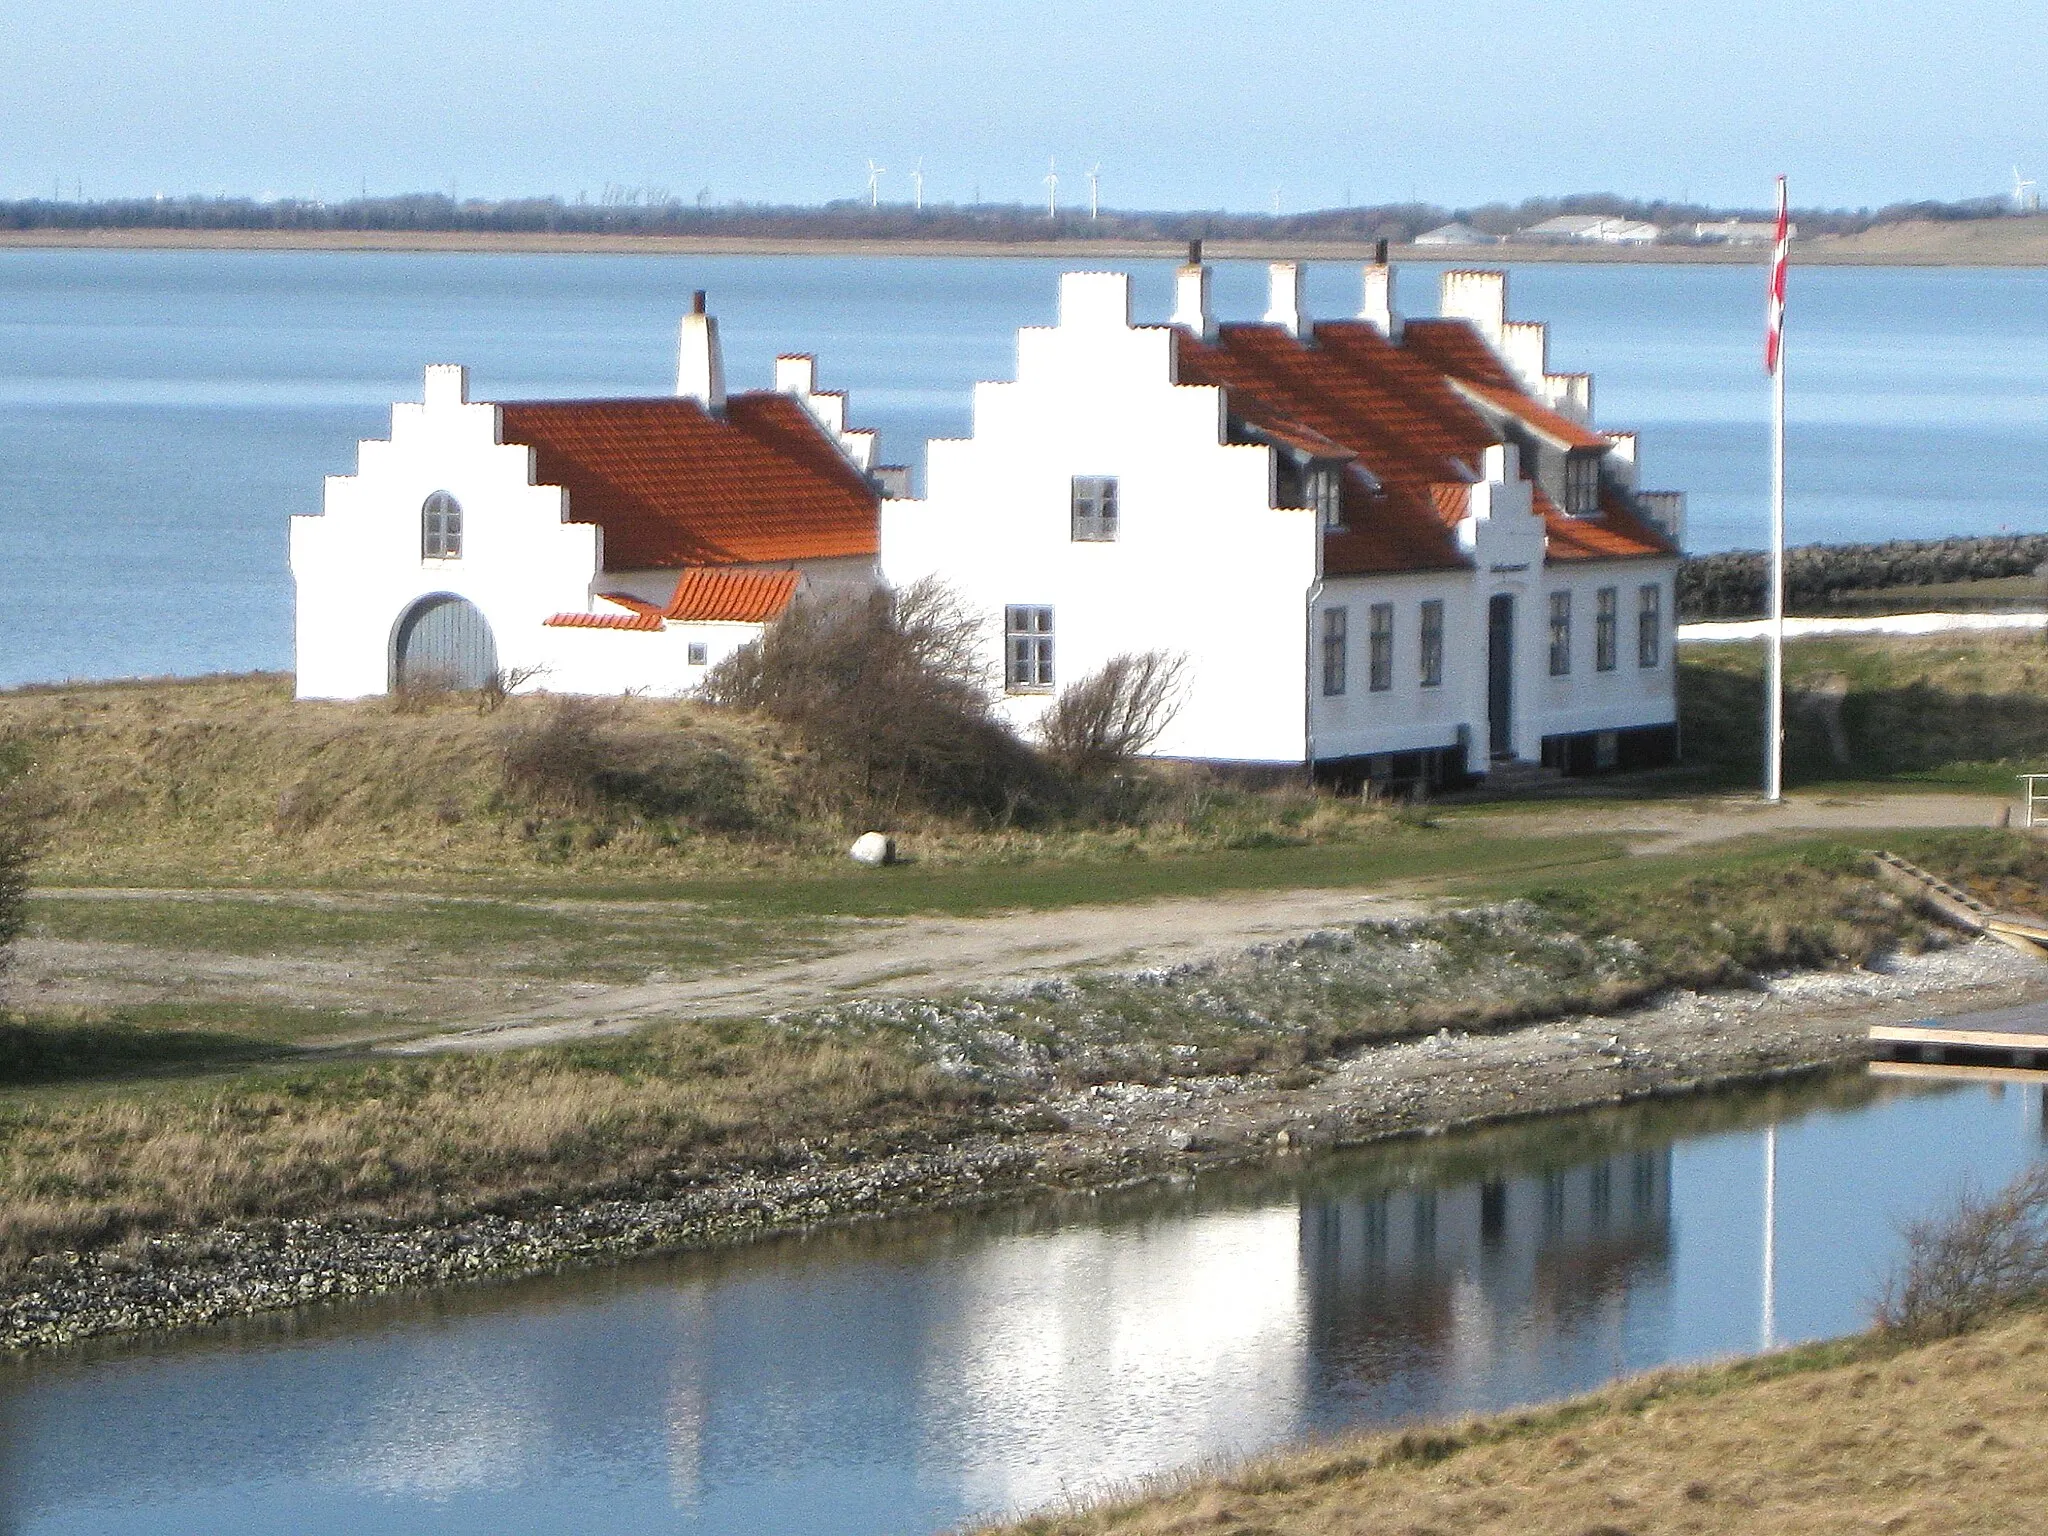 Photo showing: The museum "Limfjordsmuseet" in the small town "Løgstør". The town is located in North Jutland, Denmark.